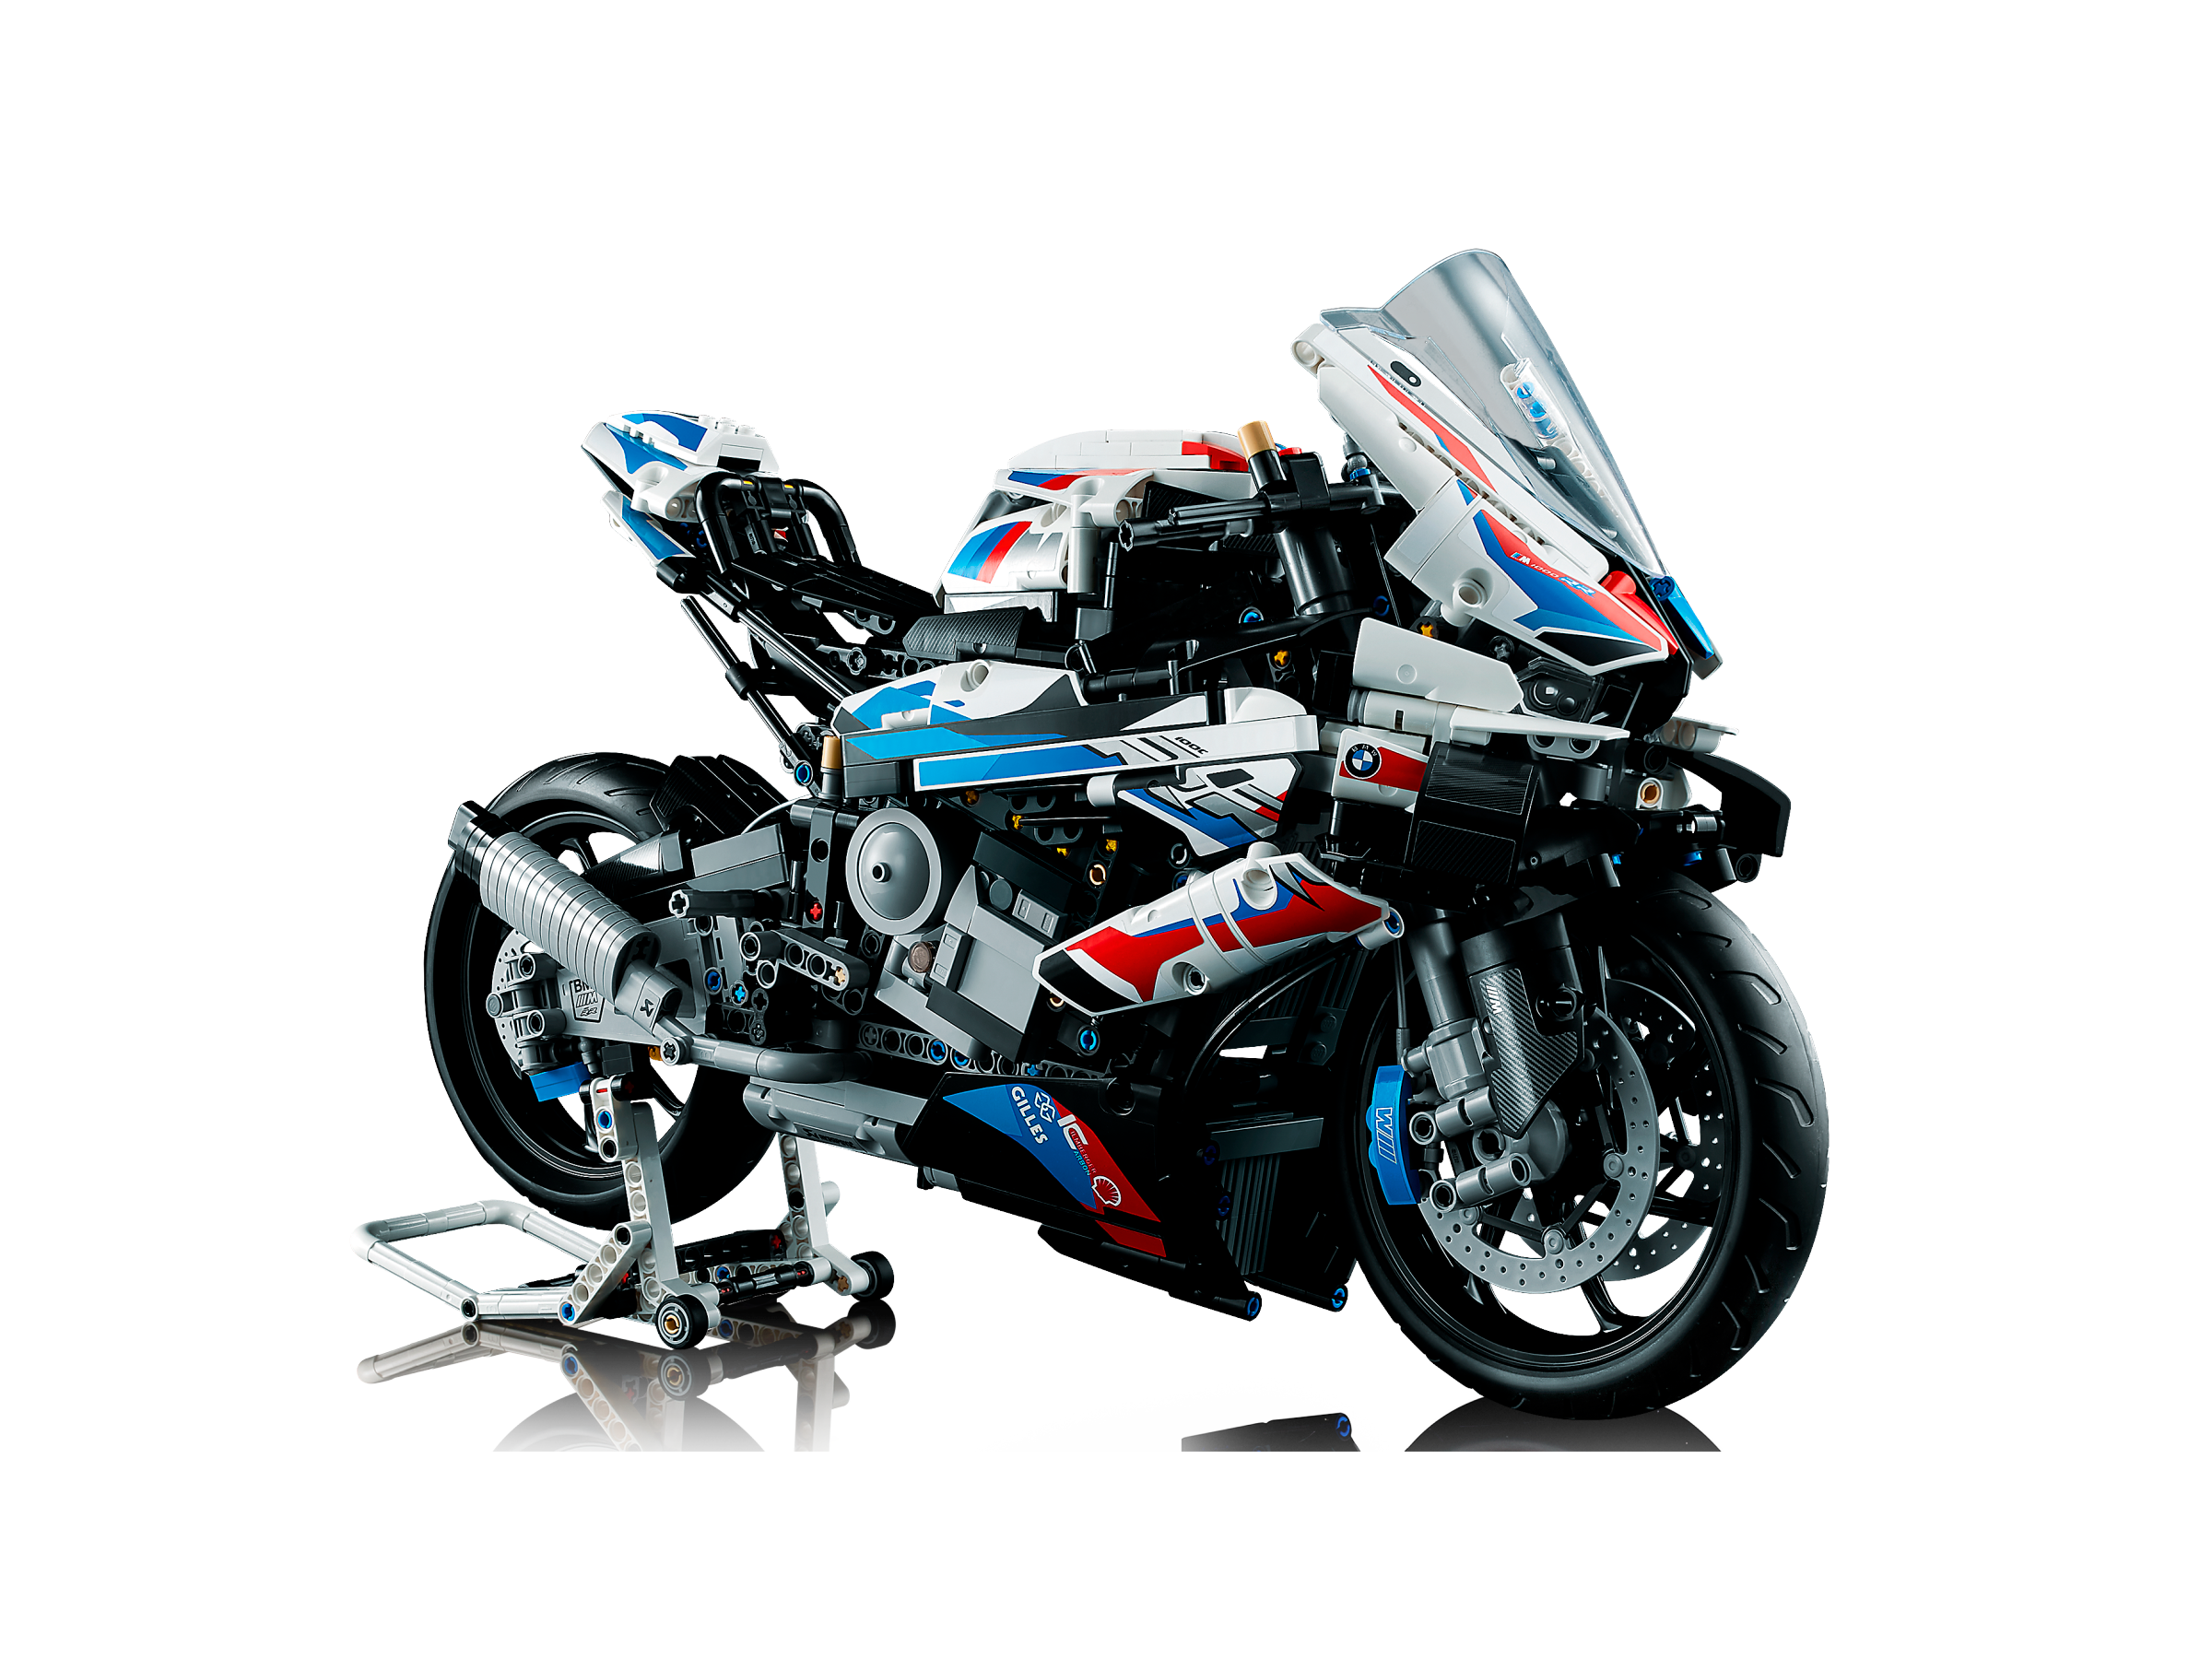  AUDIO Technics Motorcycle for Lego BMW M1000 RR - 912 pcs  Technics Motorbike Building Block , Compatible with Lego,13.3 x 6.5 x 7  inches : Toys & Games